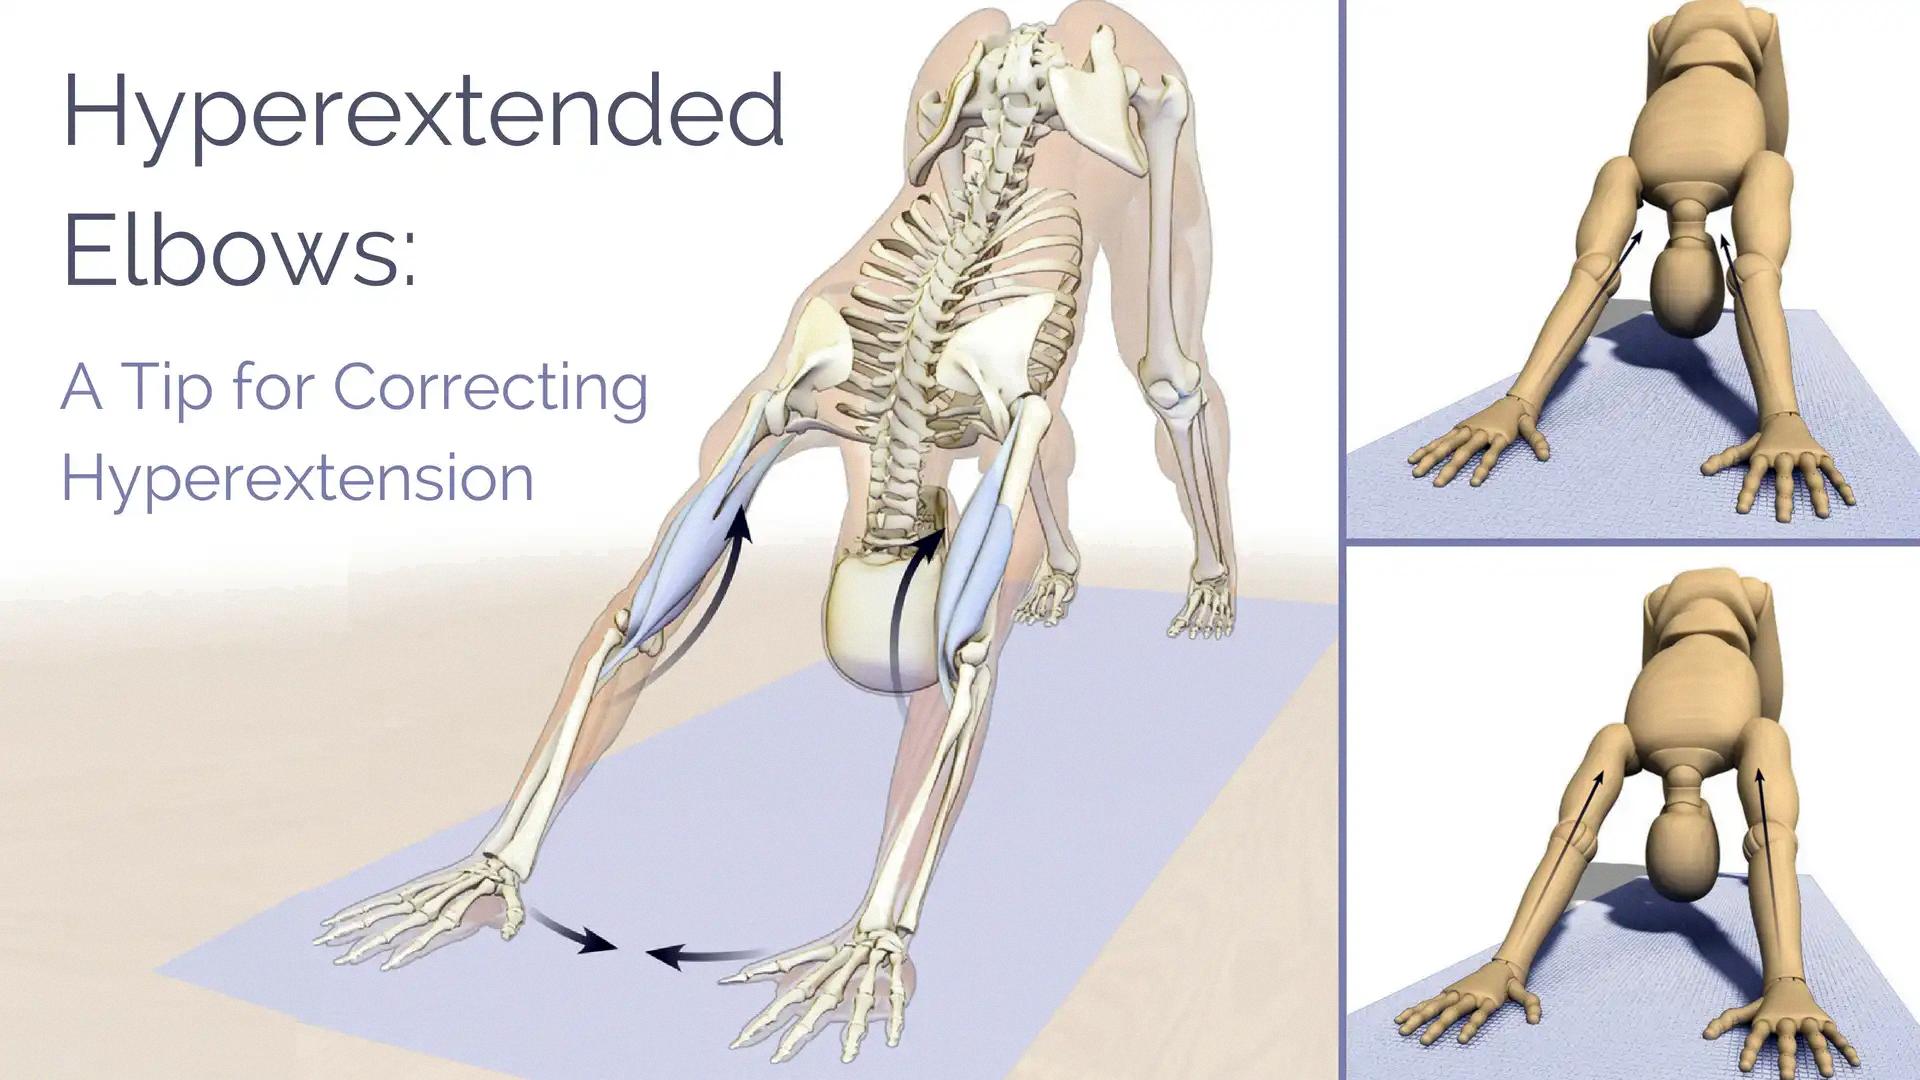 hyperextension bends a joint in the opposite direction as flexion.